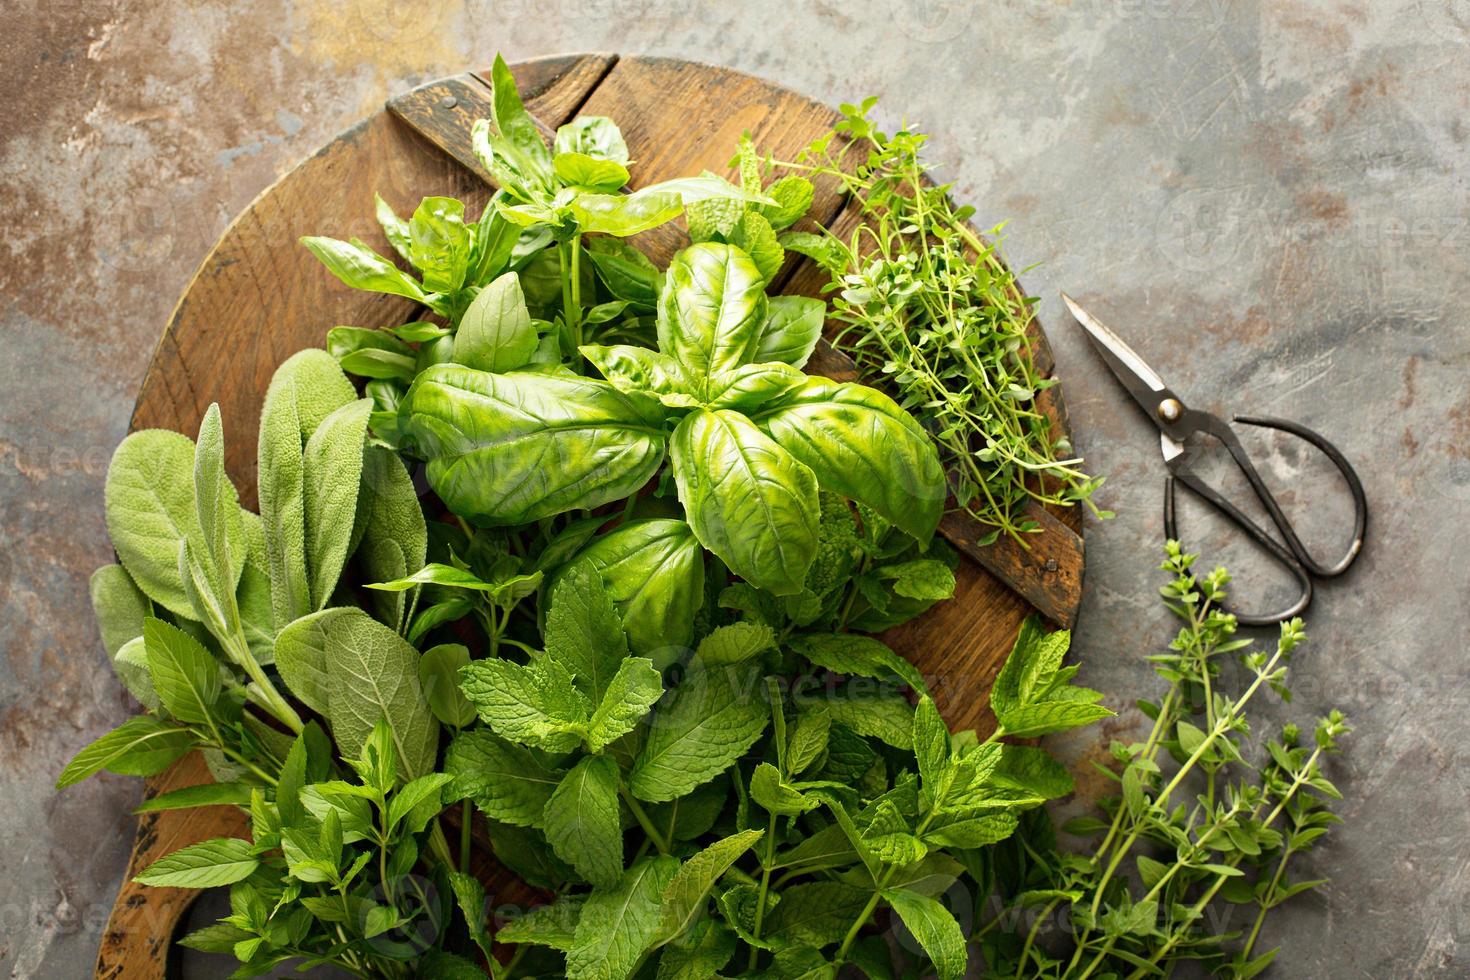 Cooking with fresh herbs photo